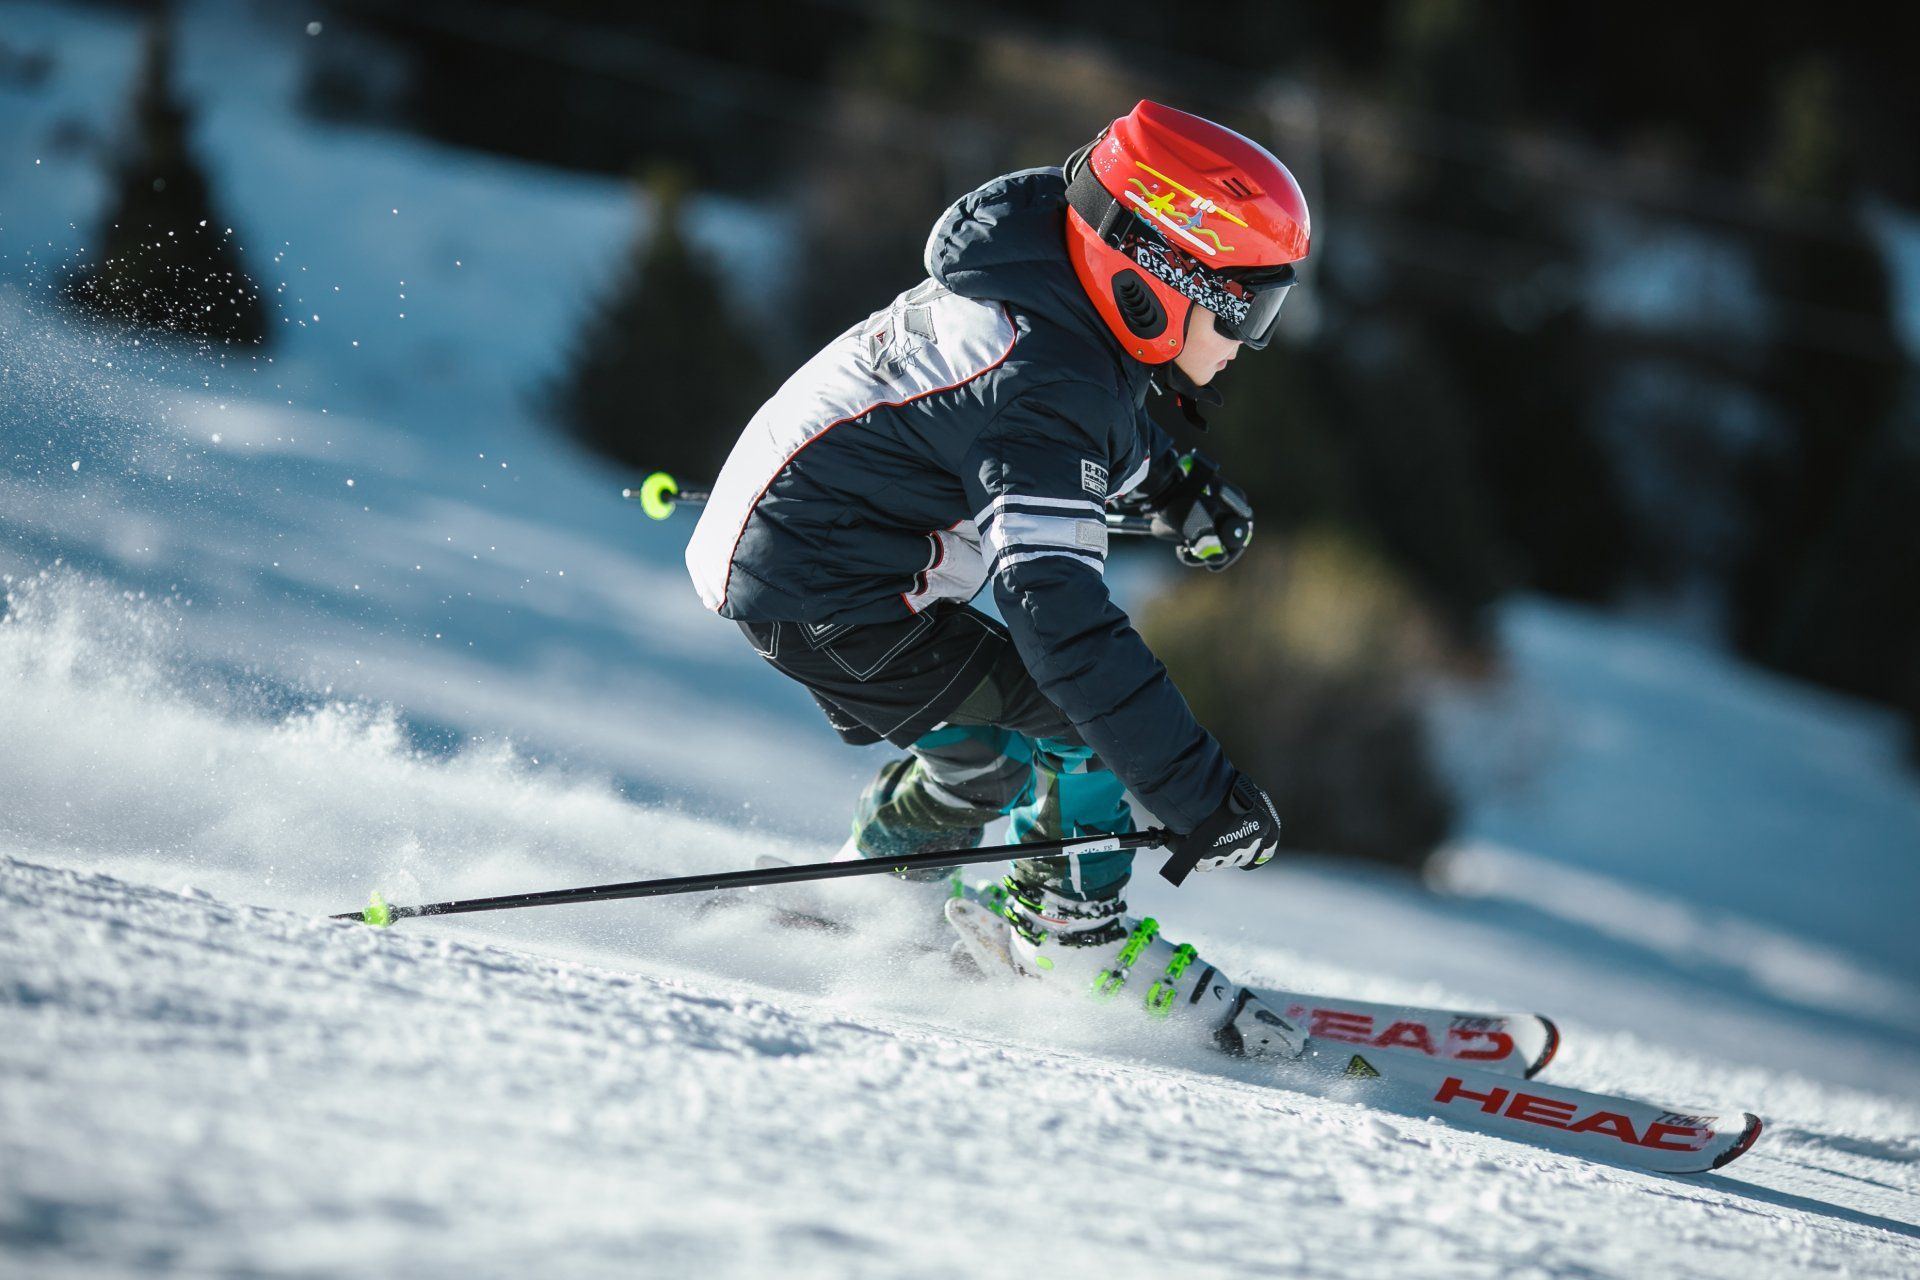 Child competitive skiiing down a moutain carving a sharp turn